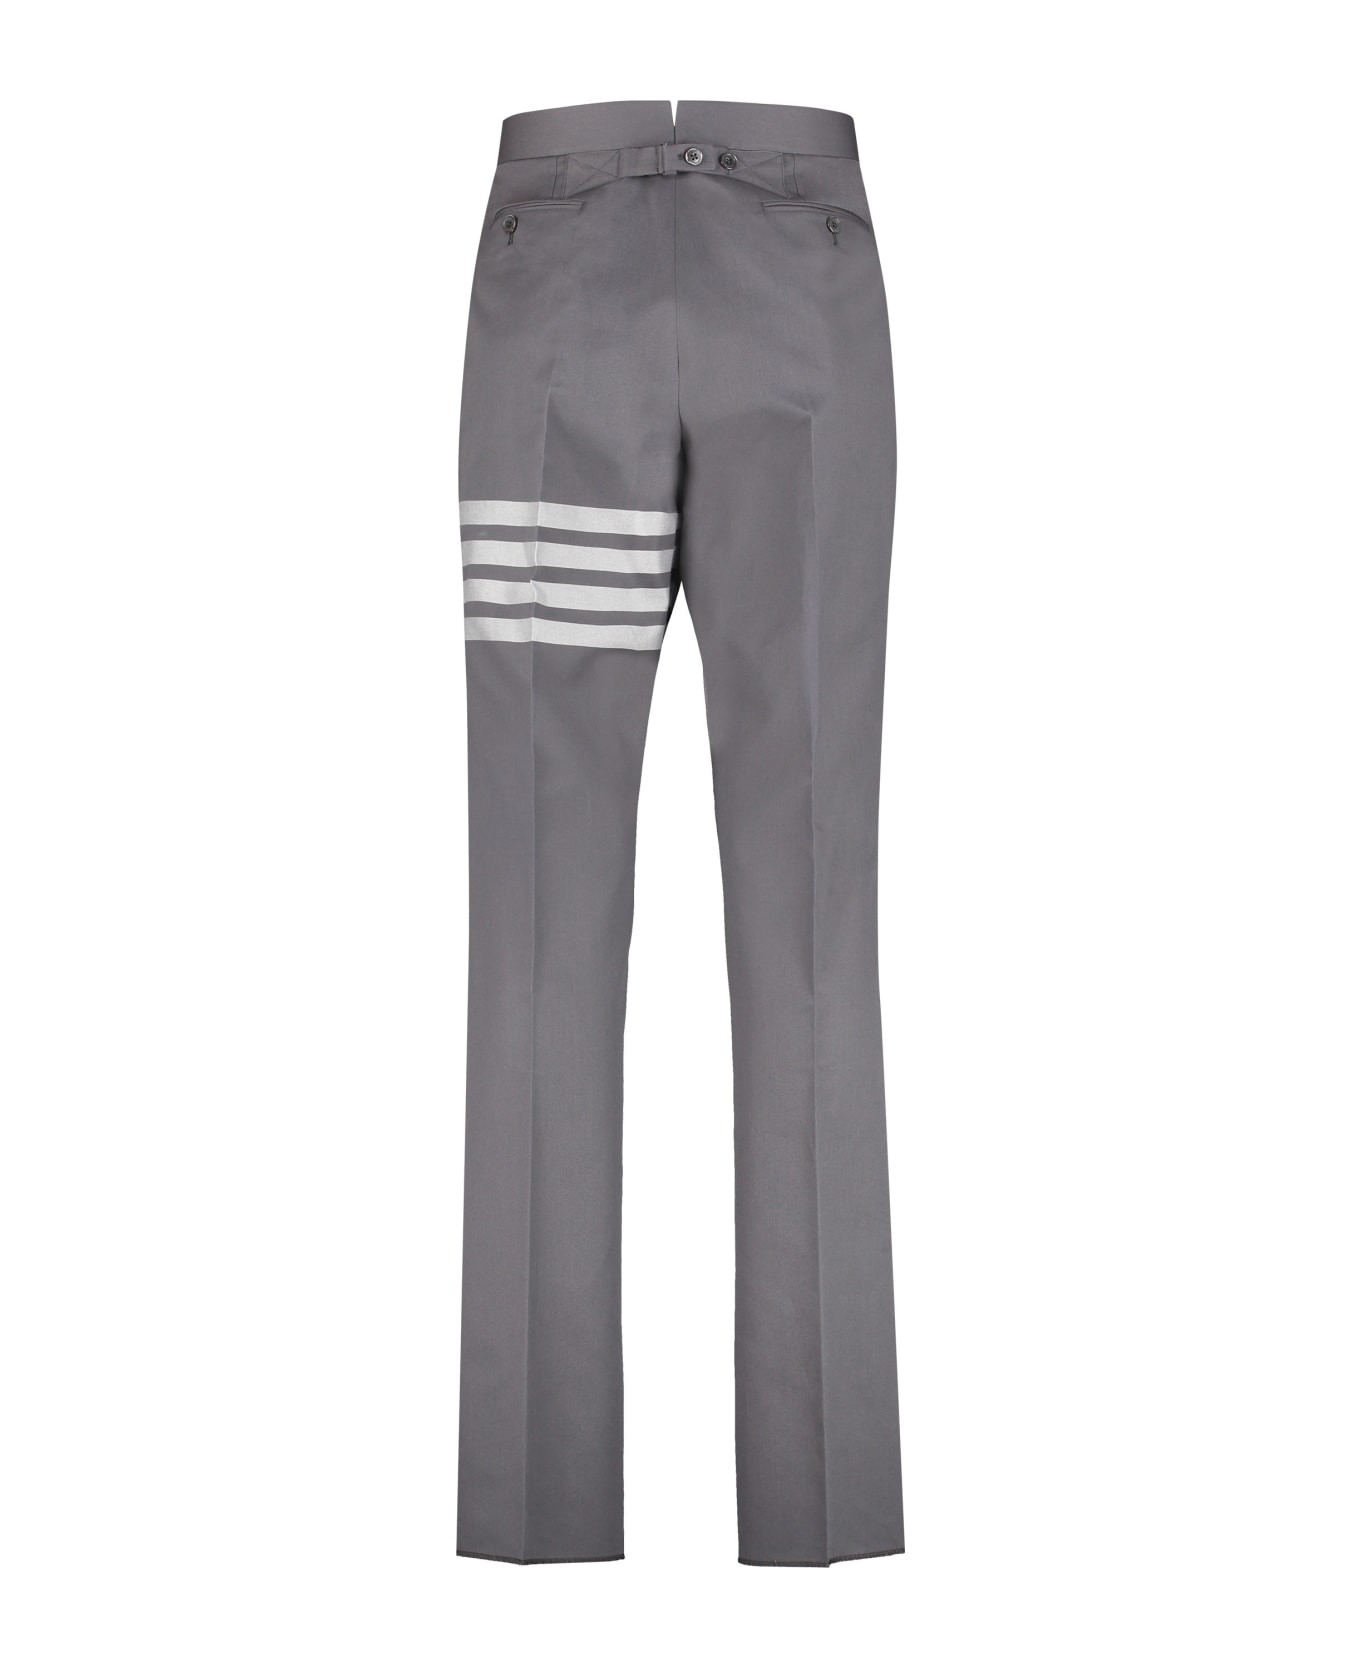 Thom Browne Tailored Trousers - grey ボトムス